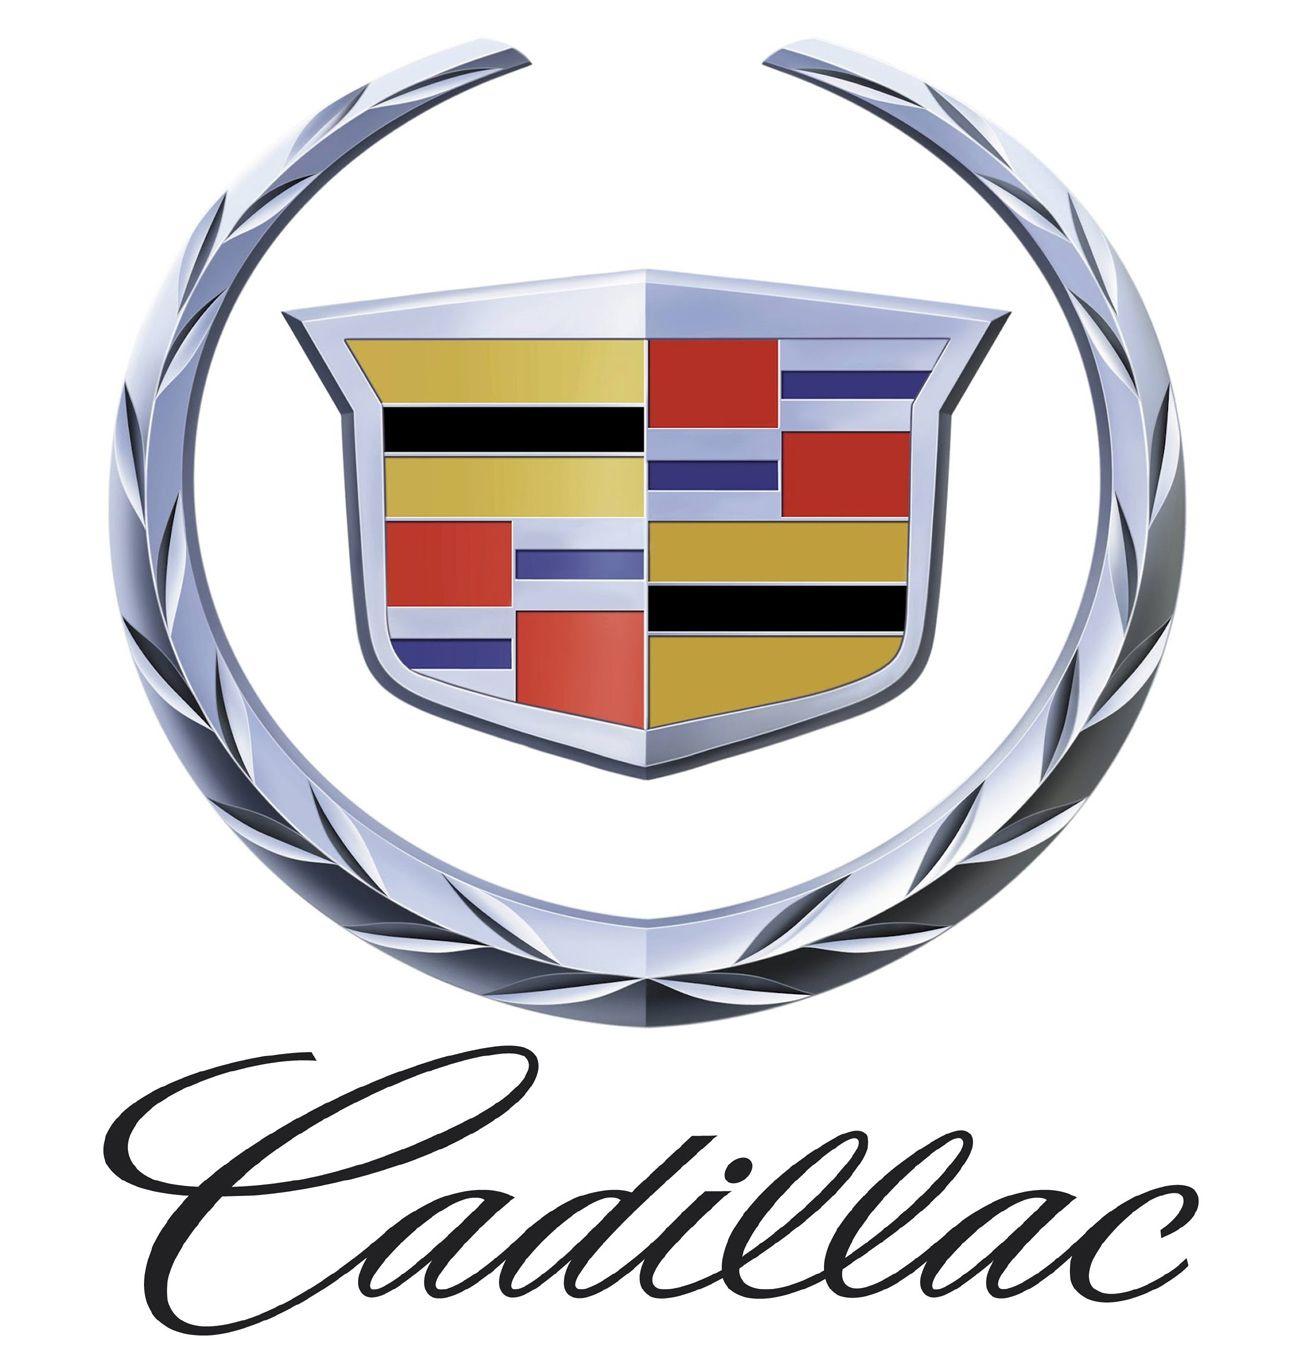 Funny Cadillac Logo - What's So Funny 'Bout Peace, Love And The New Cadillac Commercial?